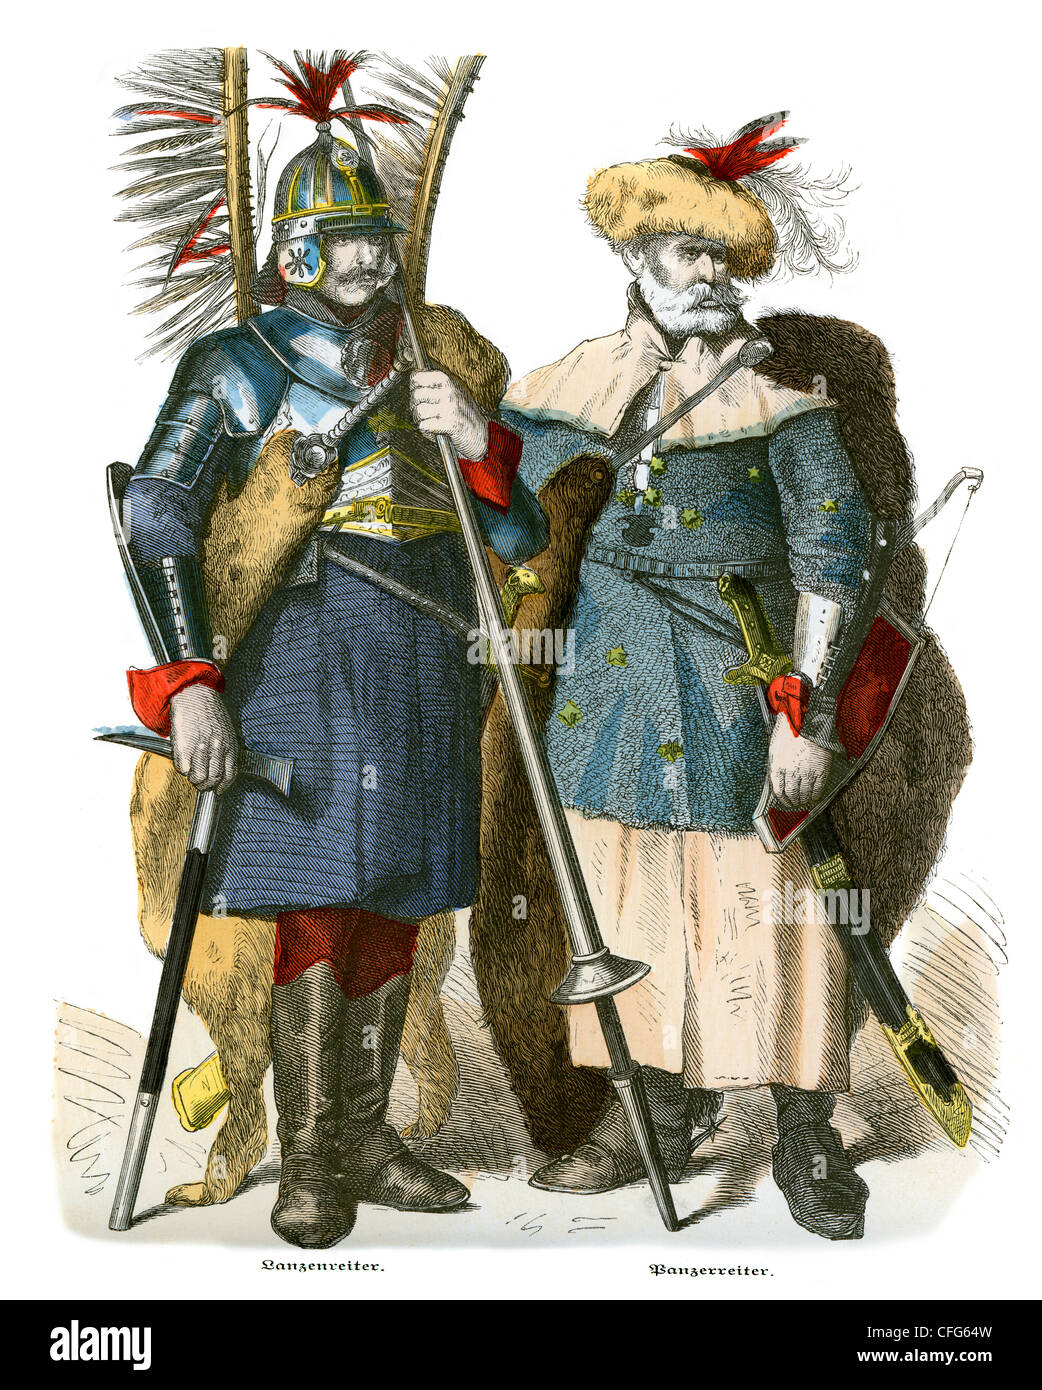 Polish soldiers from the 16th century, a lanzenreiter and panzerreiter Stock Photo